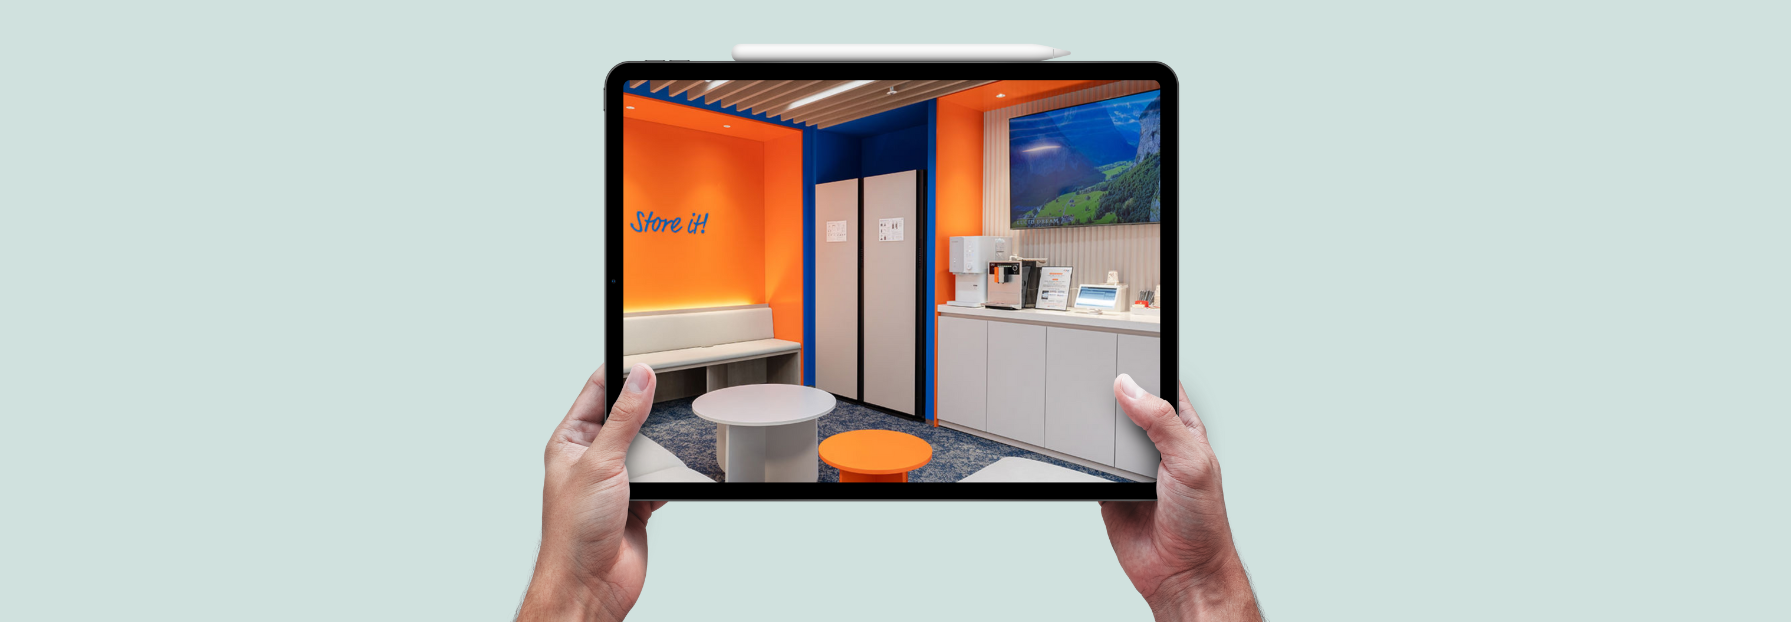 a person holding a tablet with an image of a south korean storage lounge